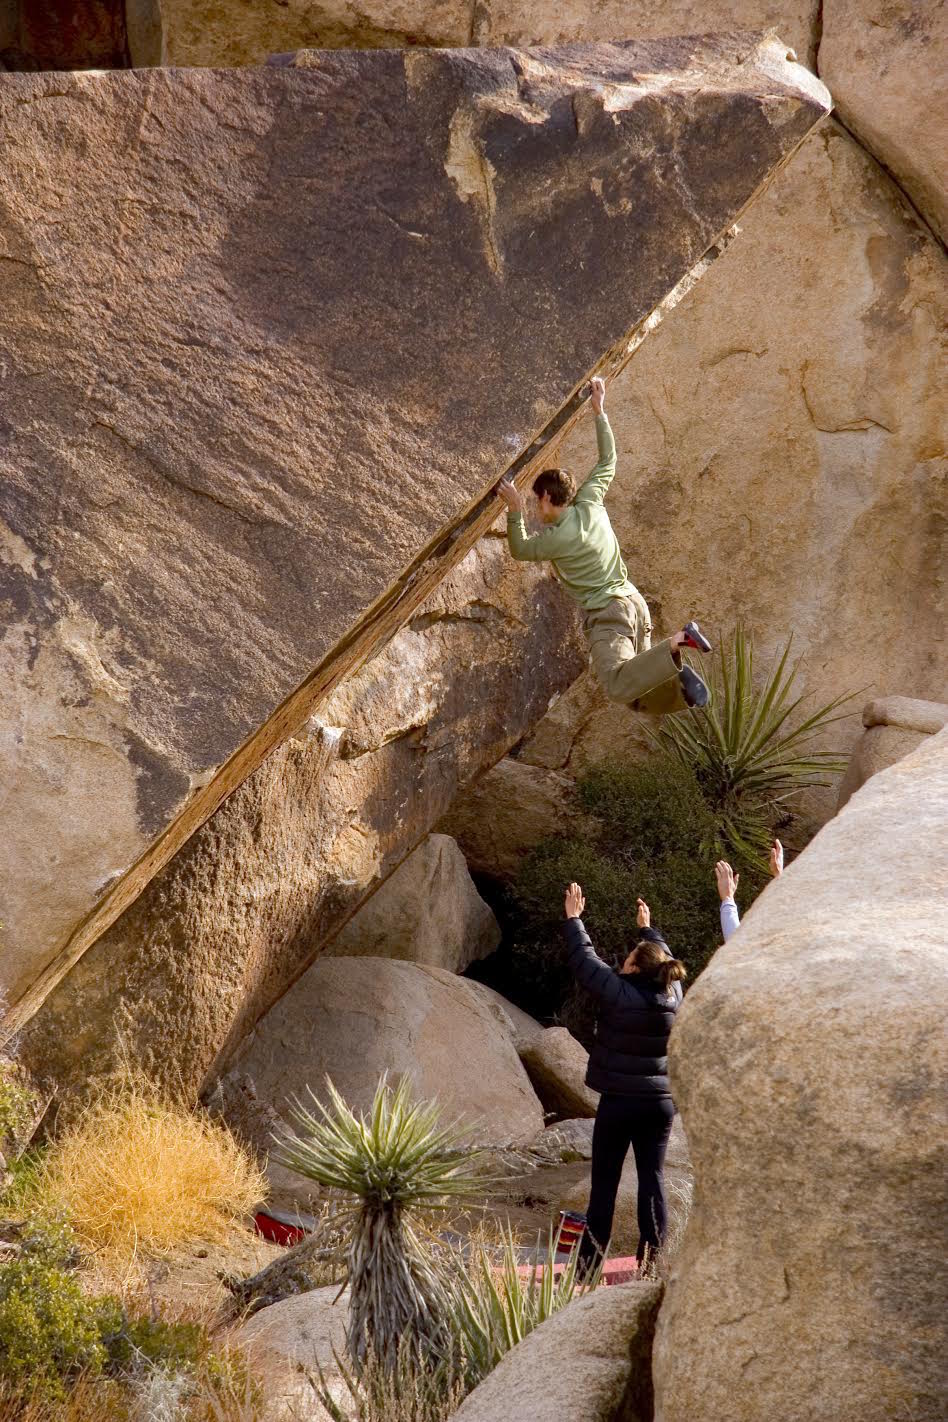 Ethan on the second ascent of Iron Resolution, Real Hidden Valley, Joshua Tree. Photo credit: Damon Corso